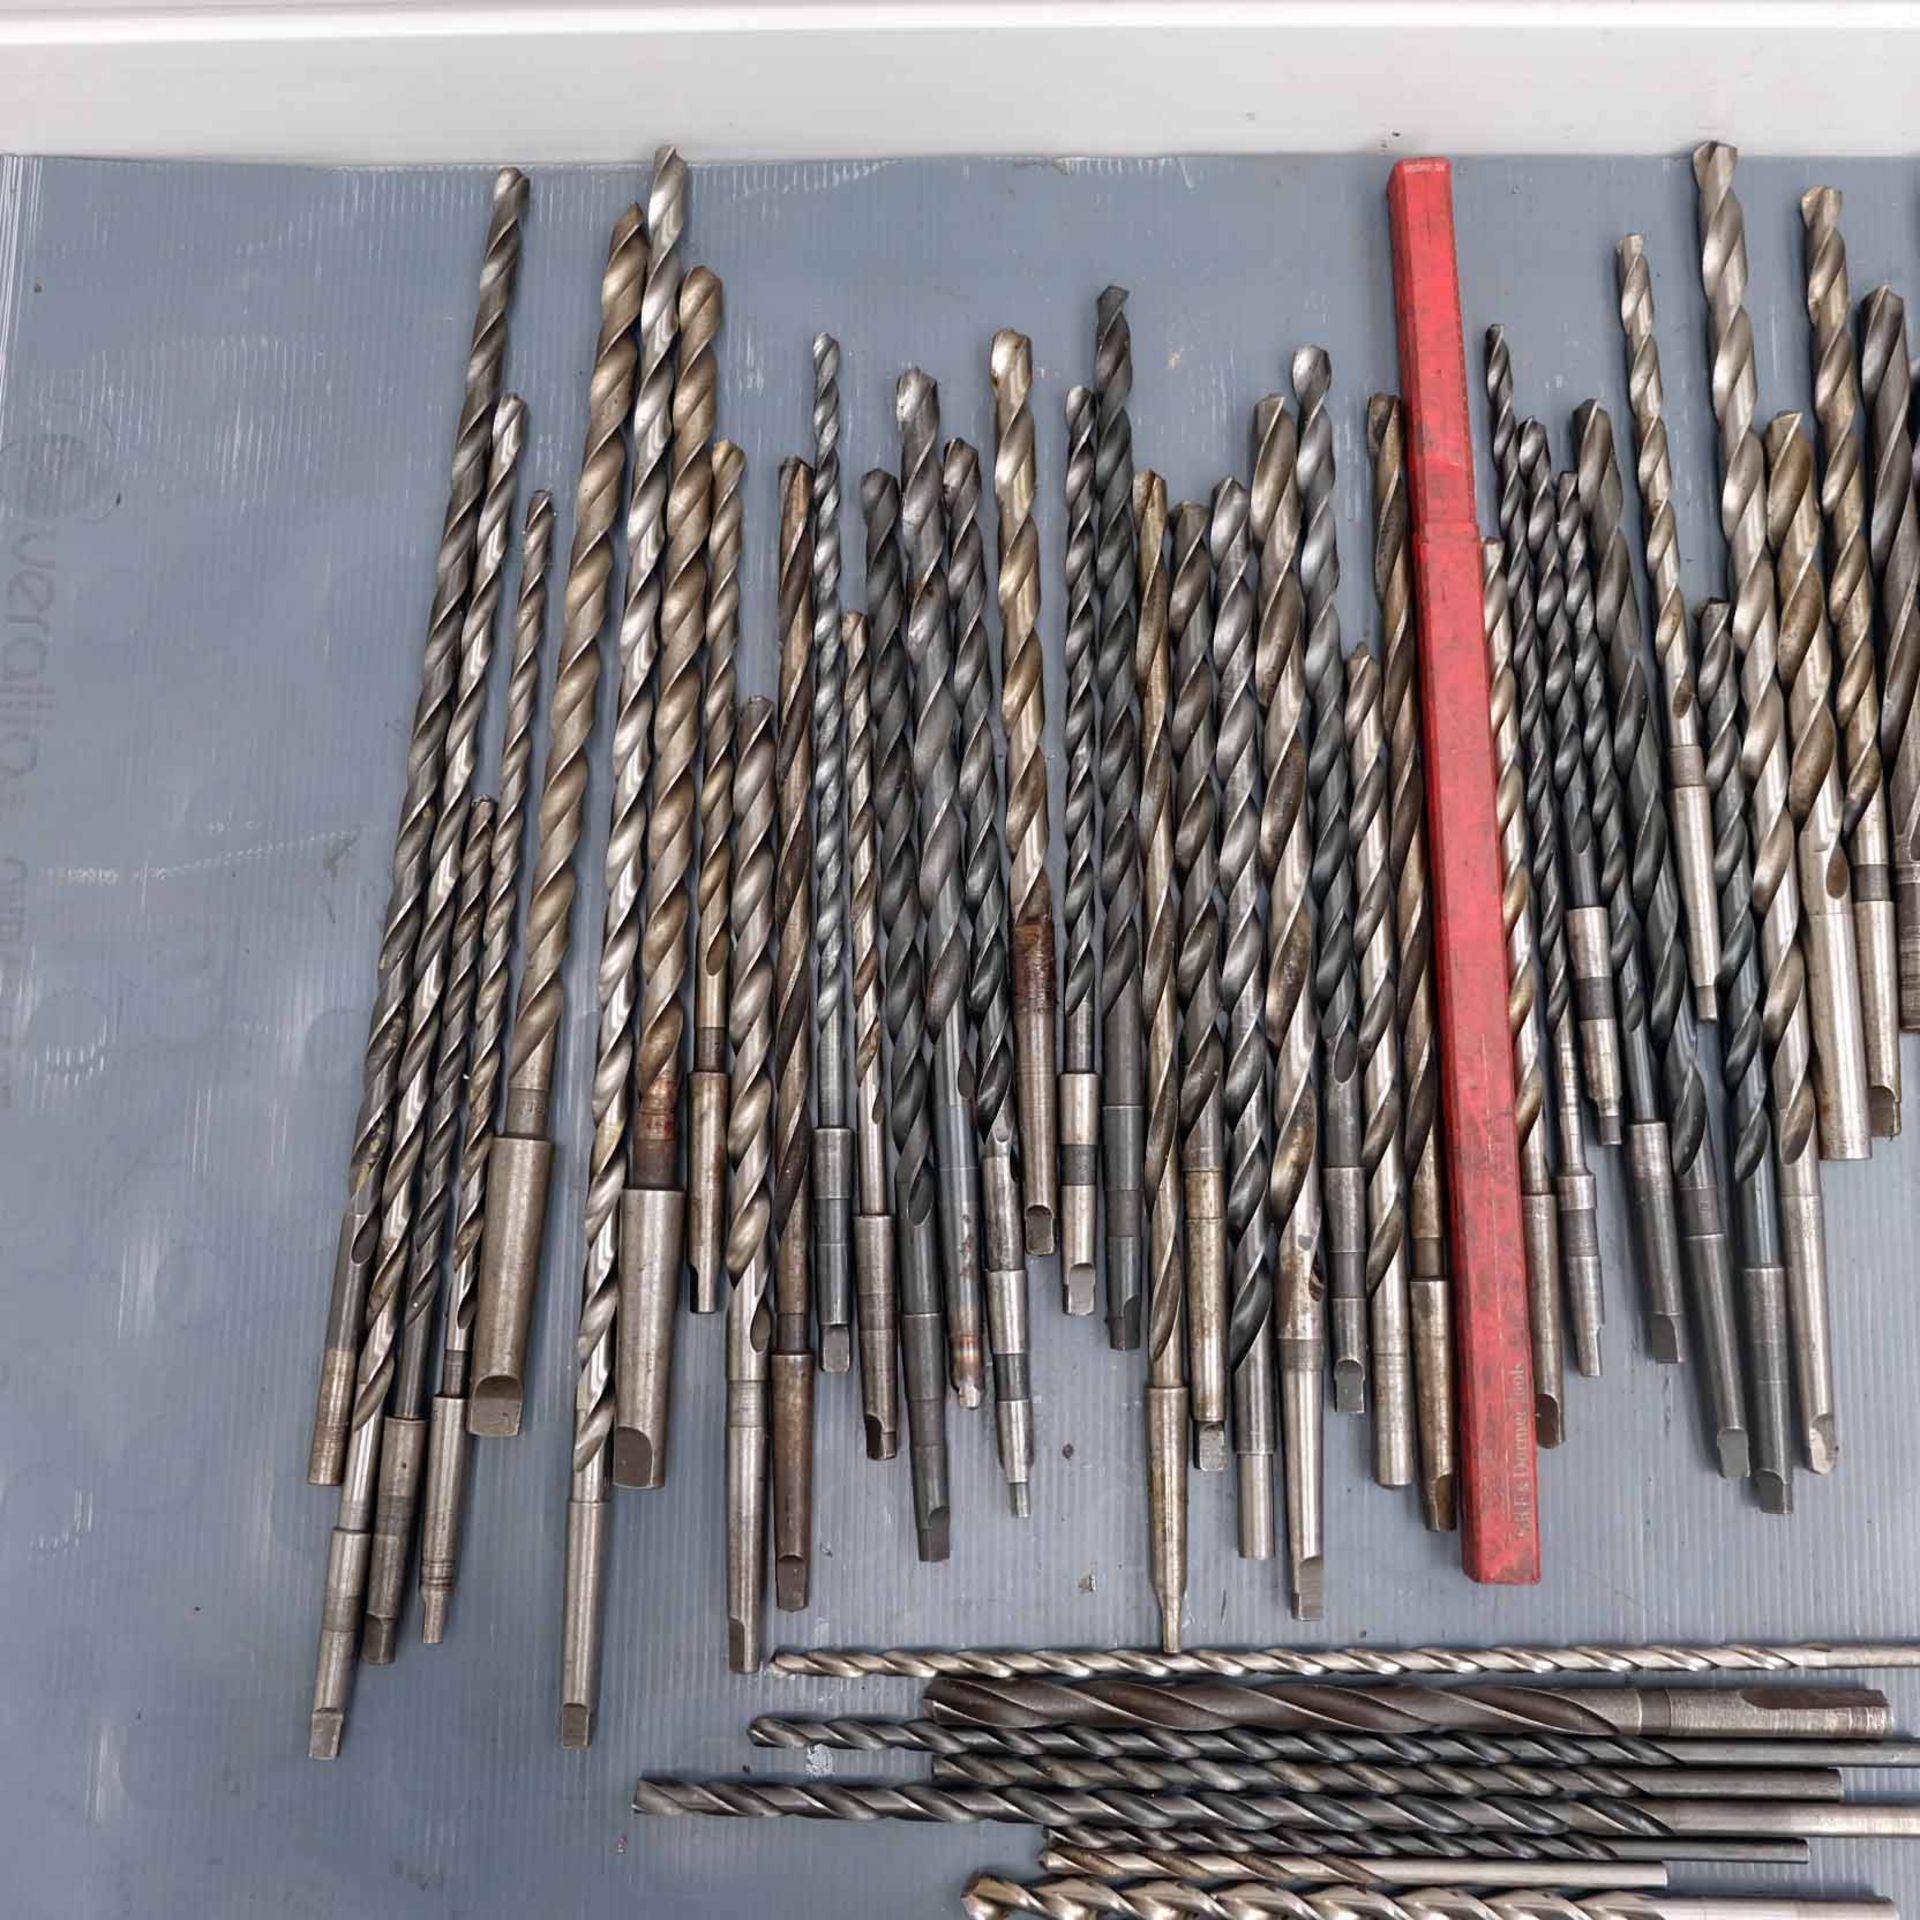 Quantity of Long Series Twist Drills. Various Imperial Sizes. 1 & 2 Morse Taper Straight Shank. - Image 2 of 4